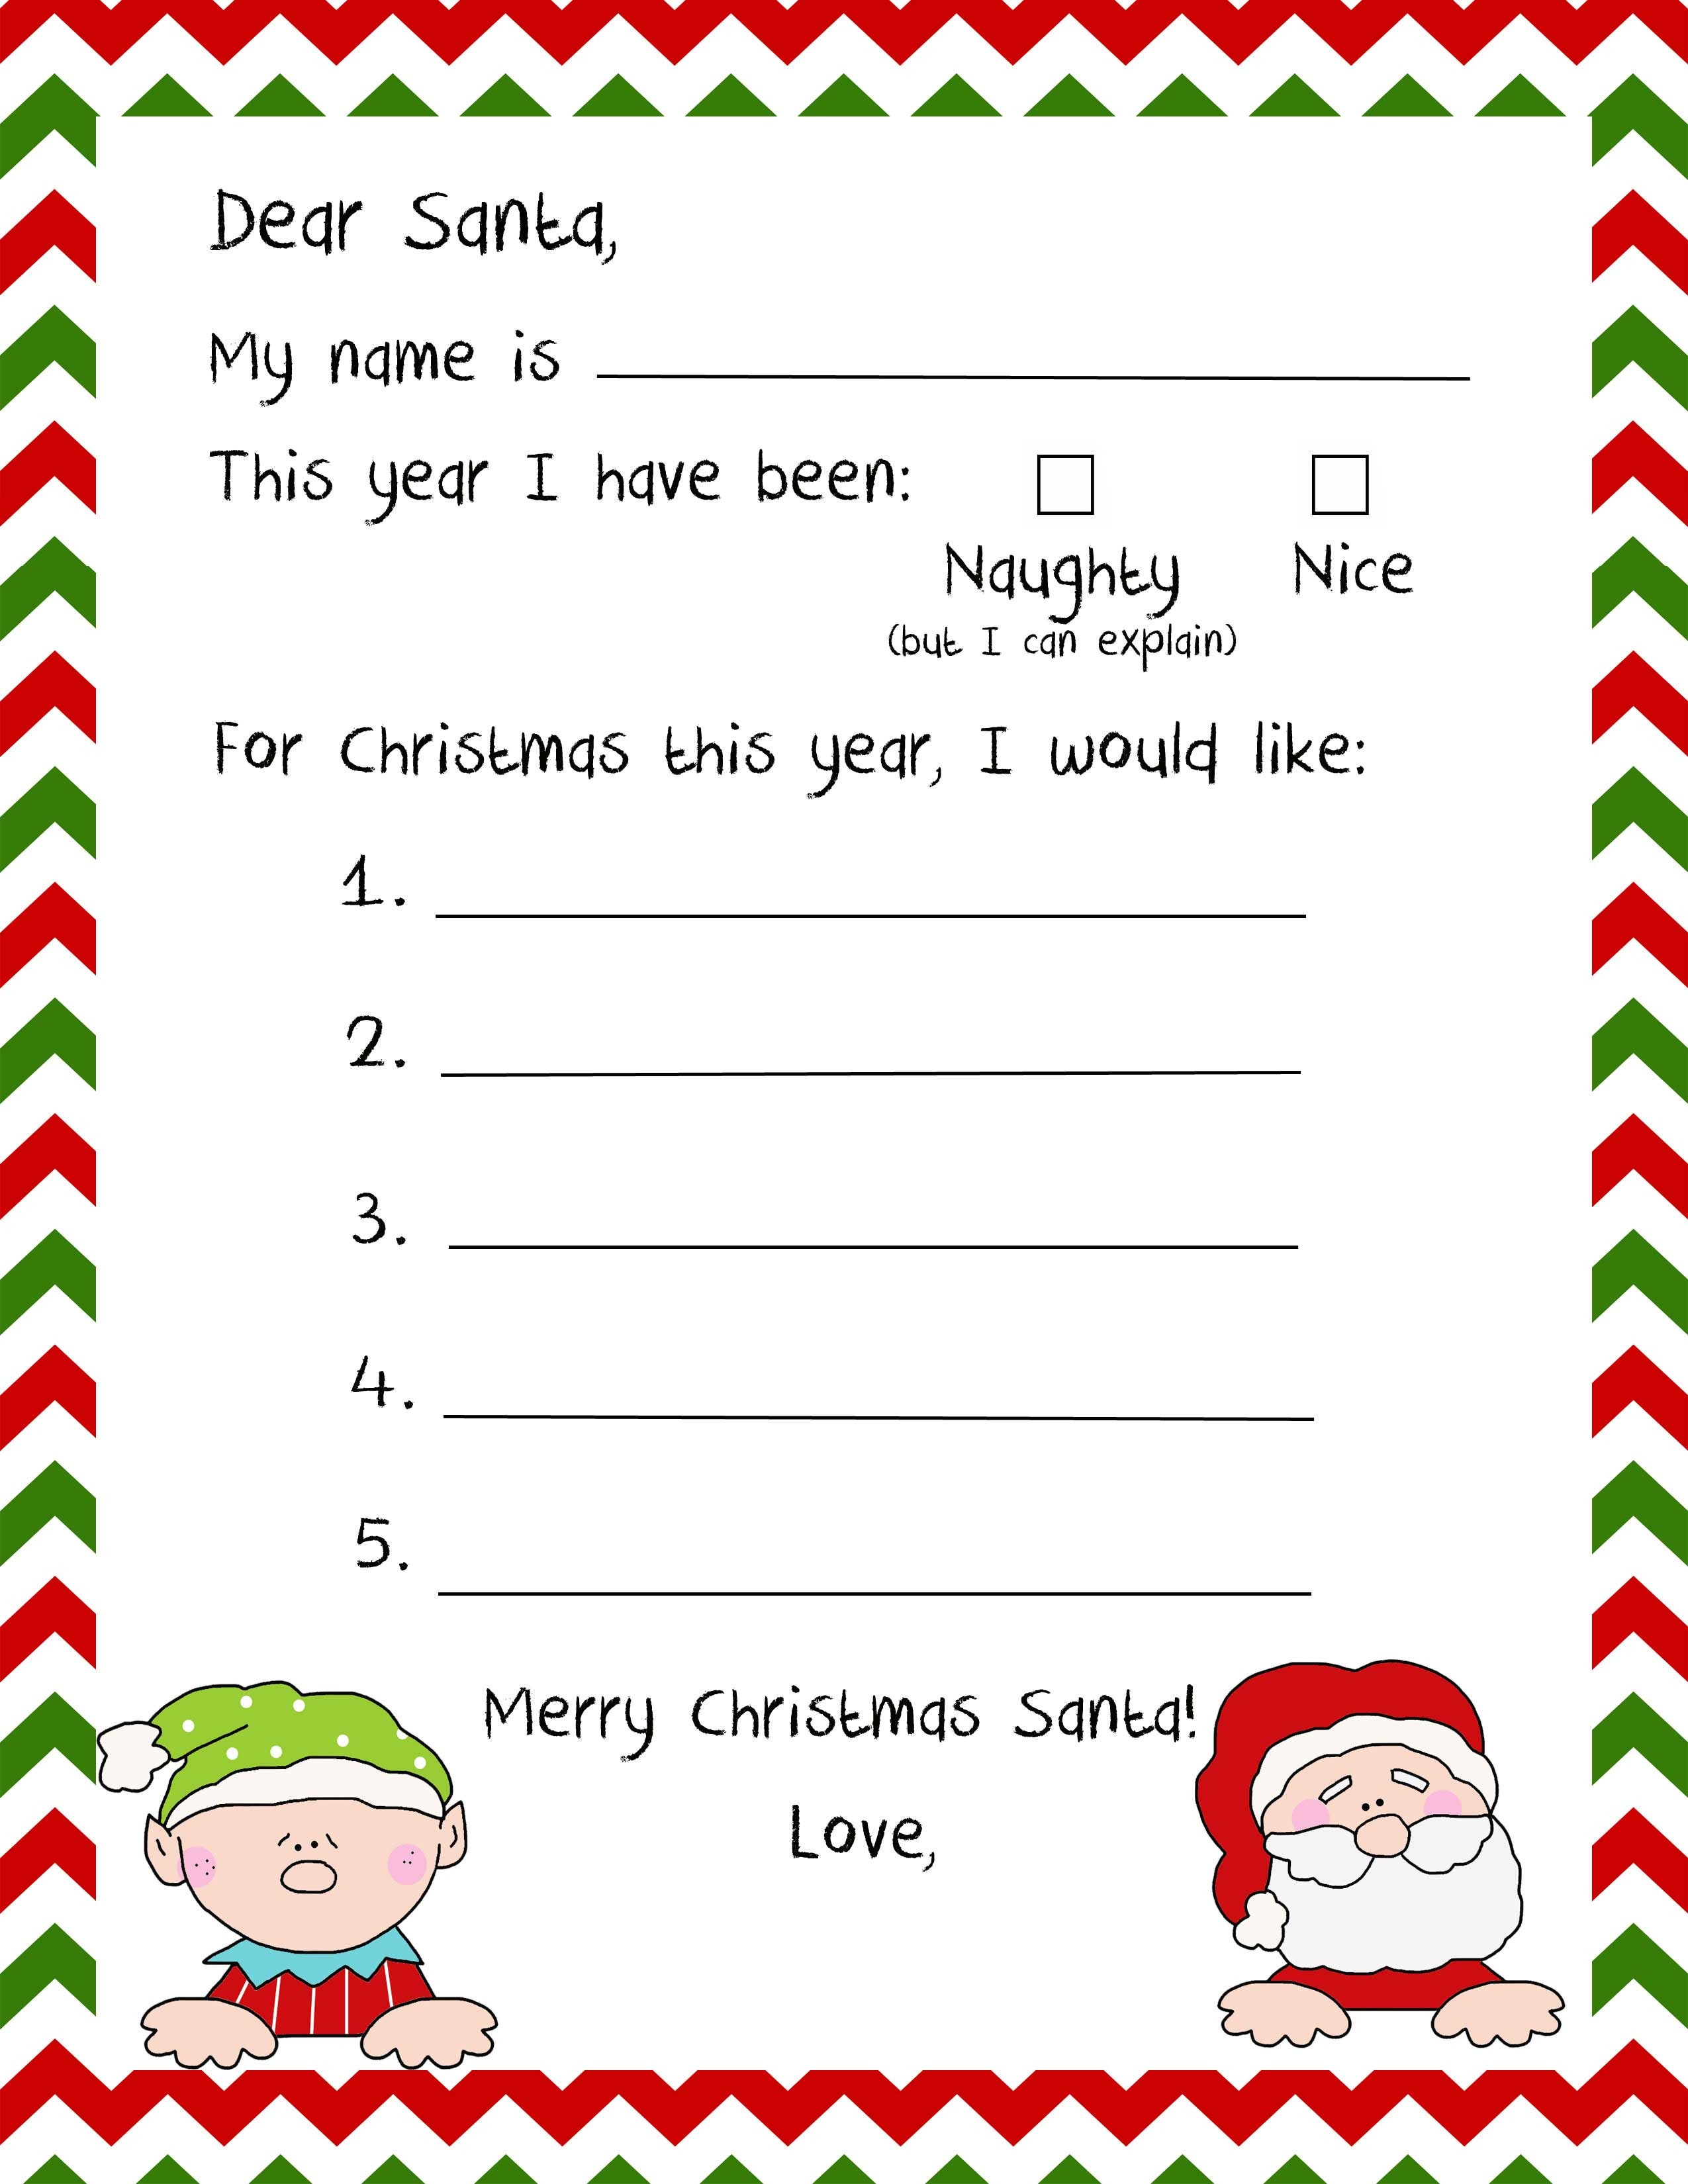 20 Letters To Santa And Printable Envelopes – Christmas Wishes ...